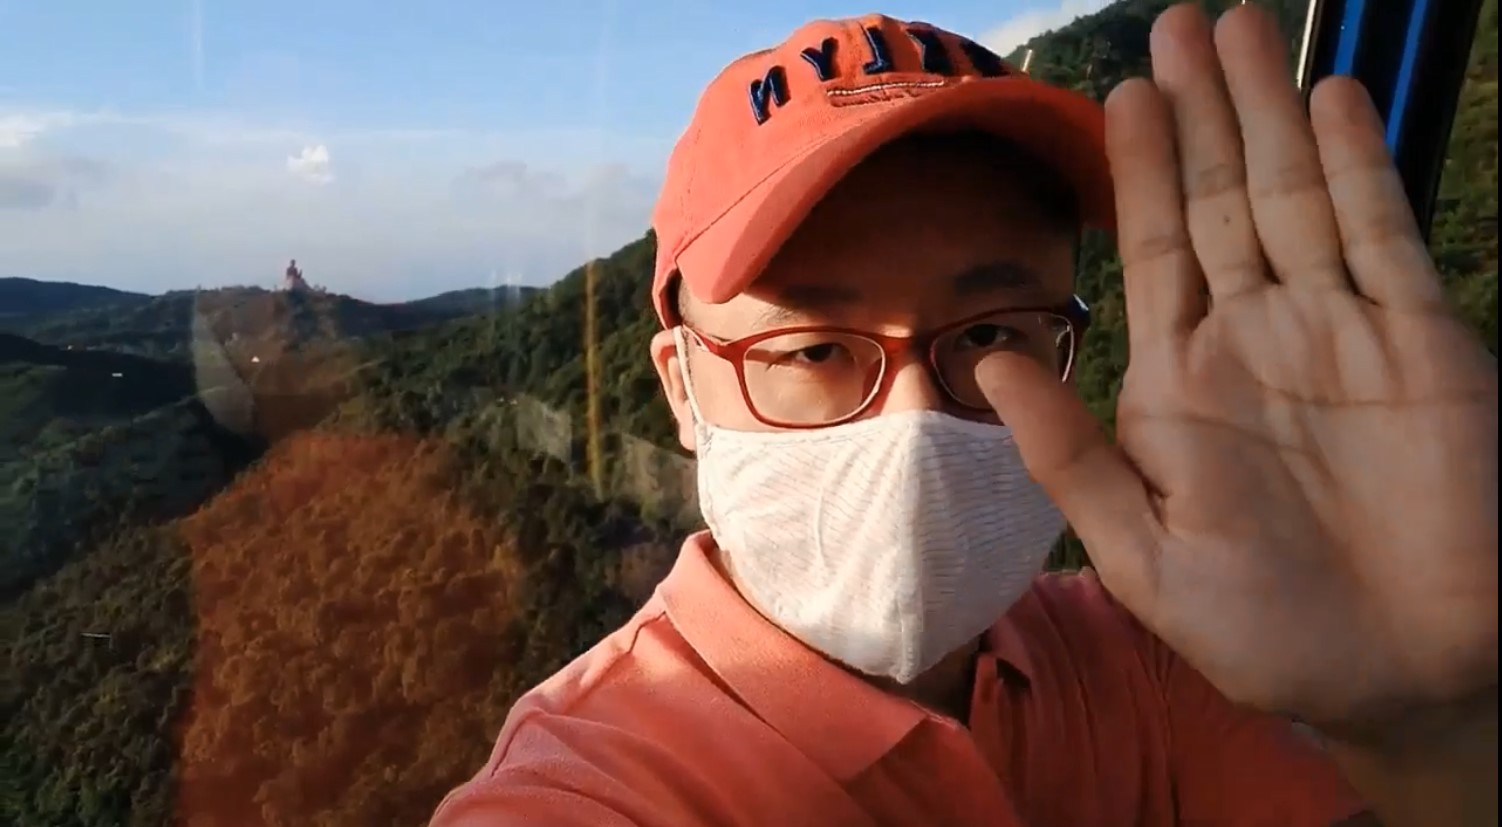 Share Frank's video of taking the reopened Ngong Ping 360 Cable Car